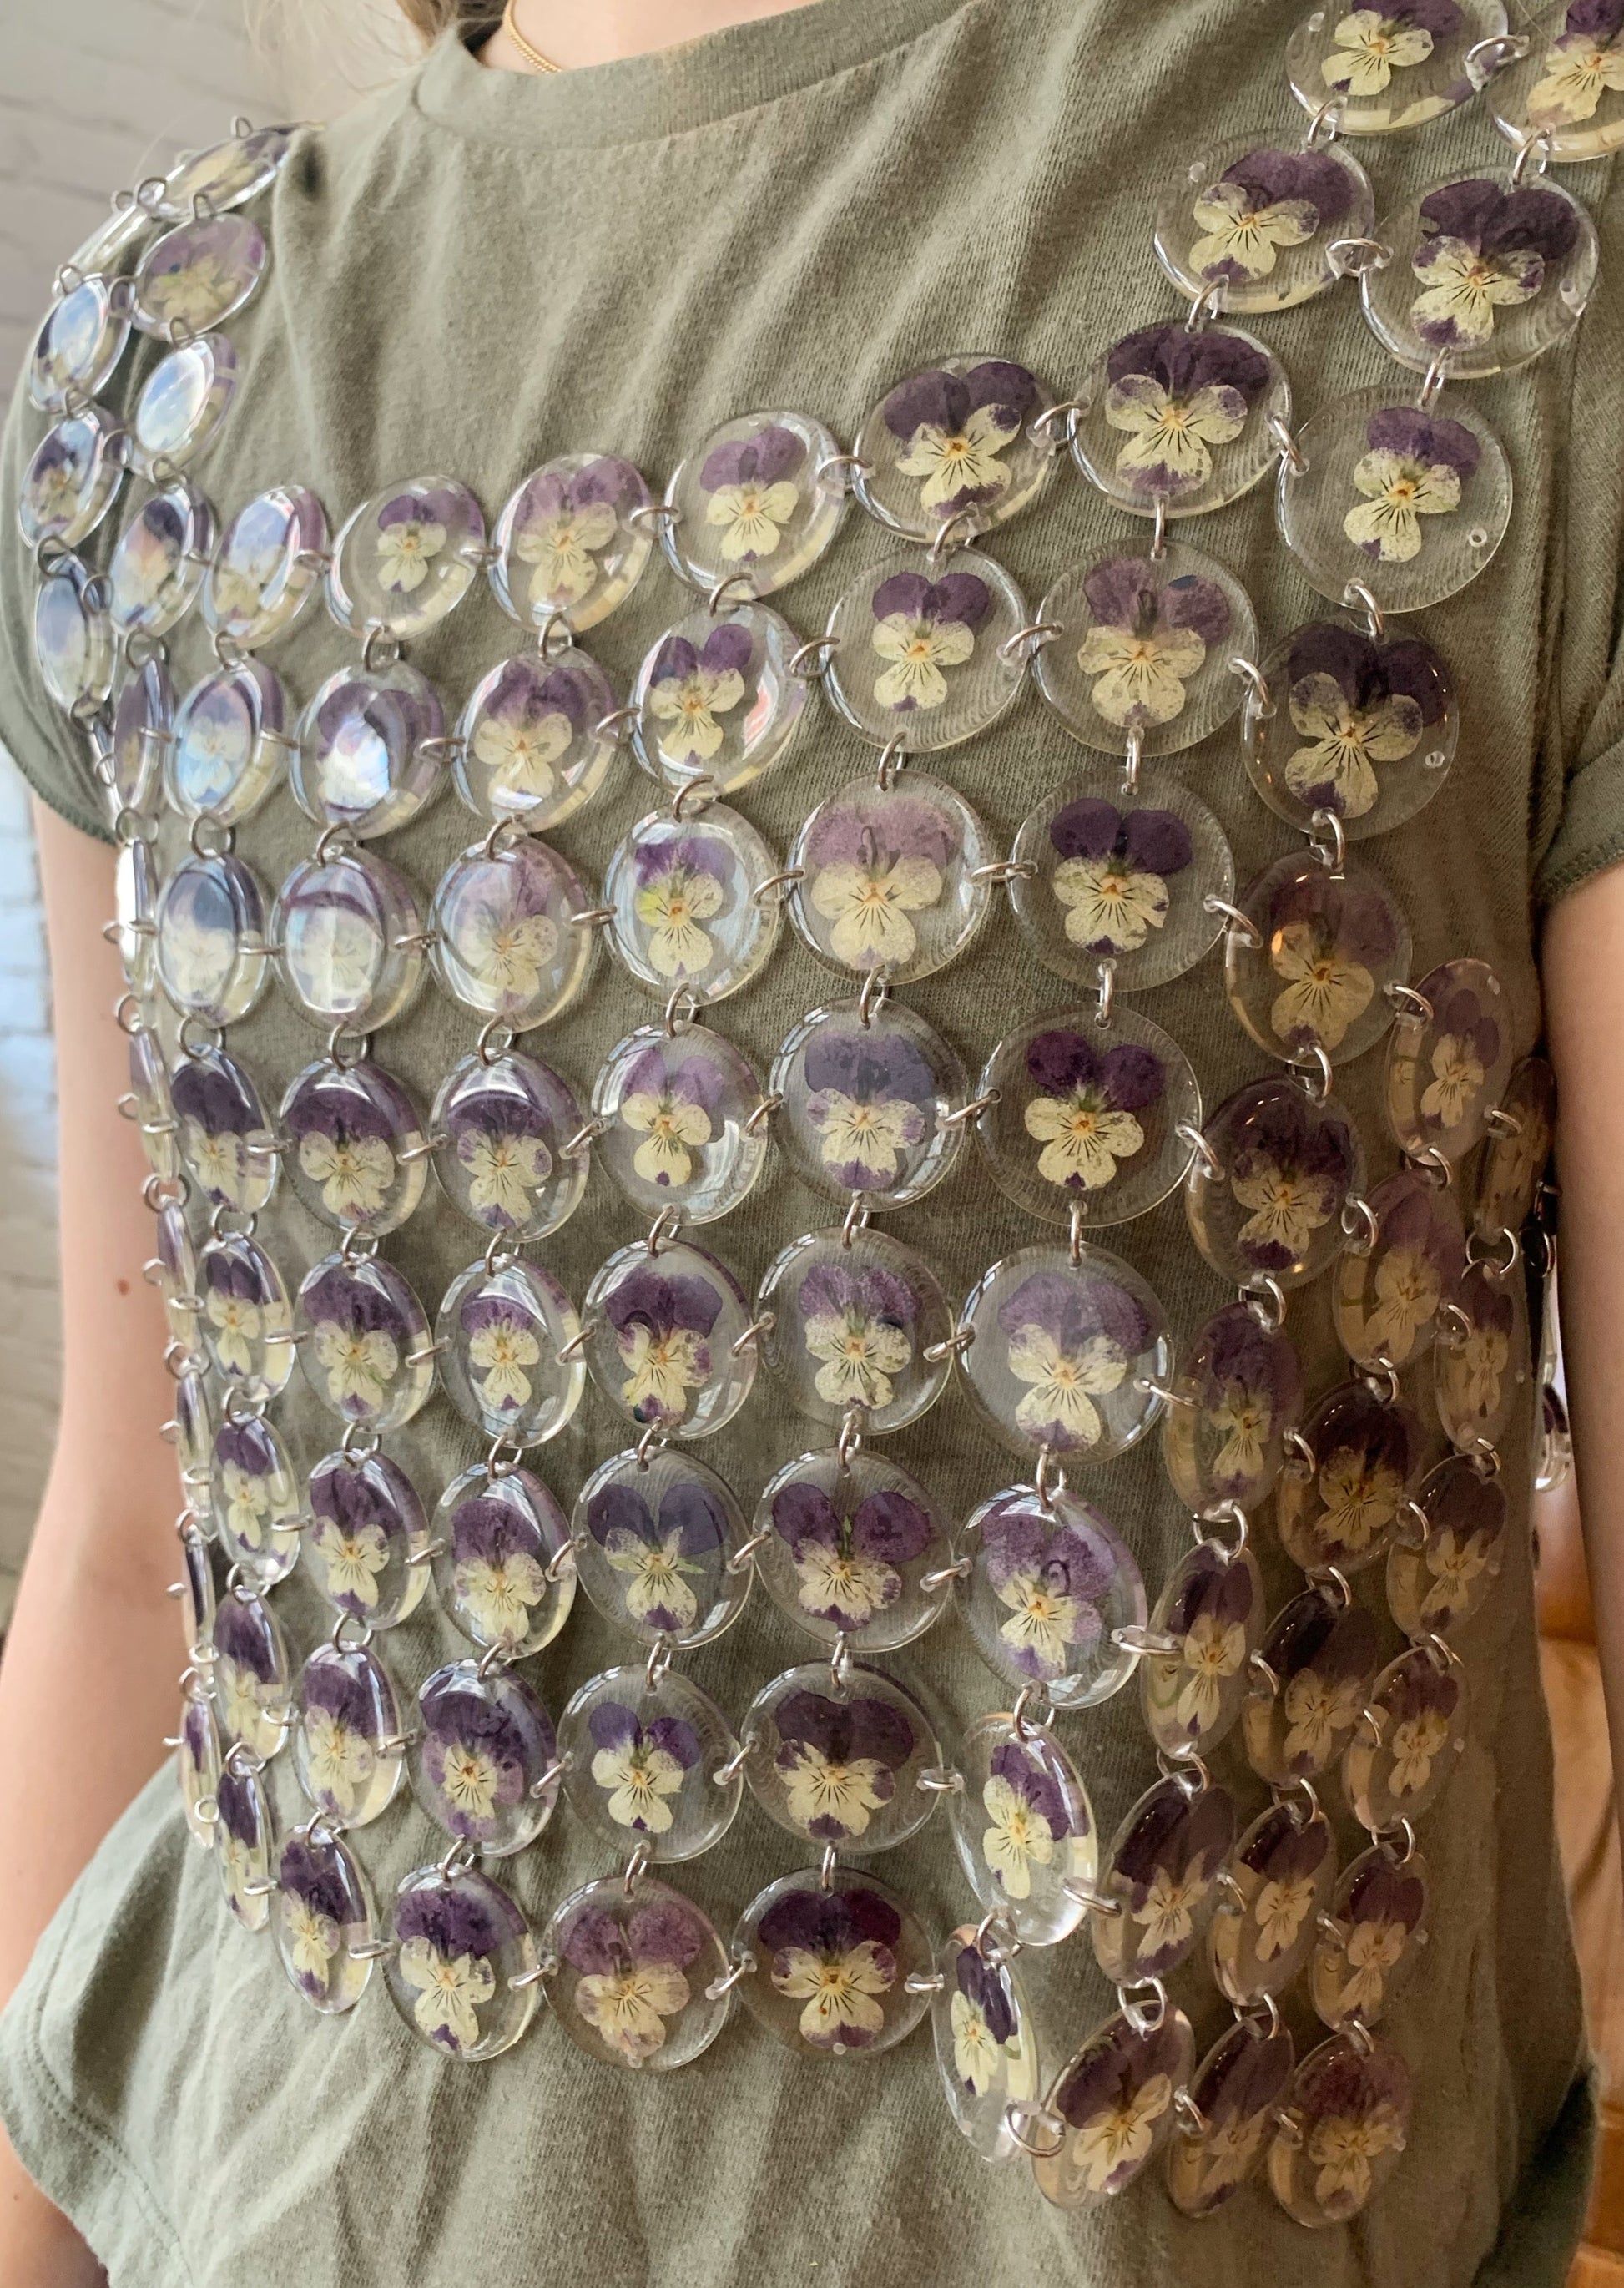 Chainmaille top made of pansies preserved in round resin charms connected by silver jump rings.